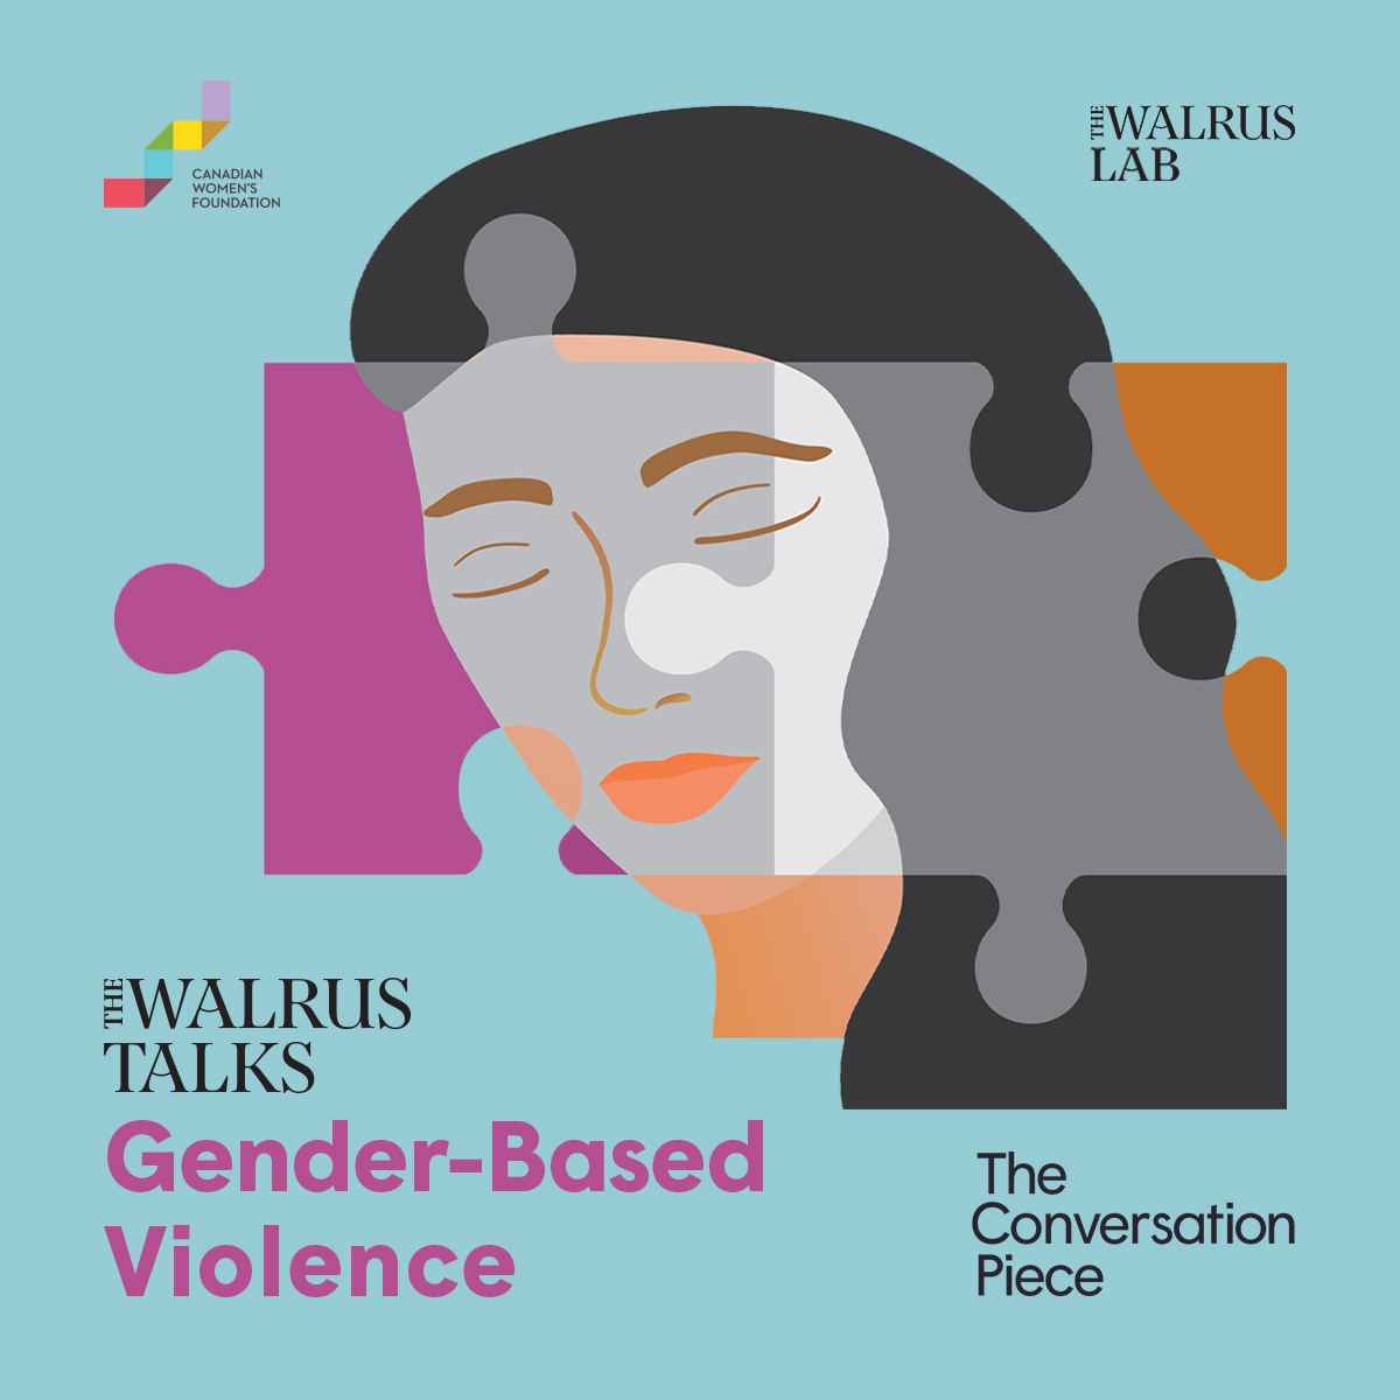 Pamela Cross: The Unintended Consequences of Criminalizing Intimate Partner Violence